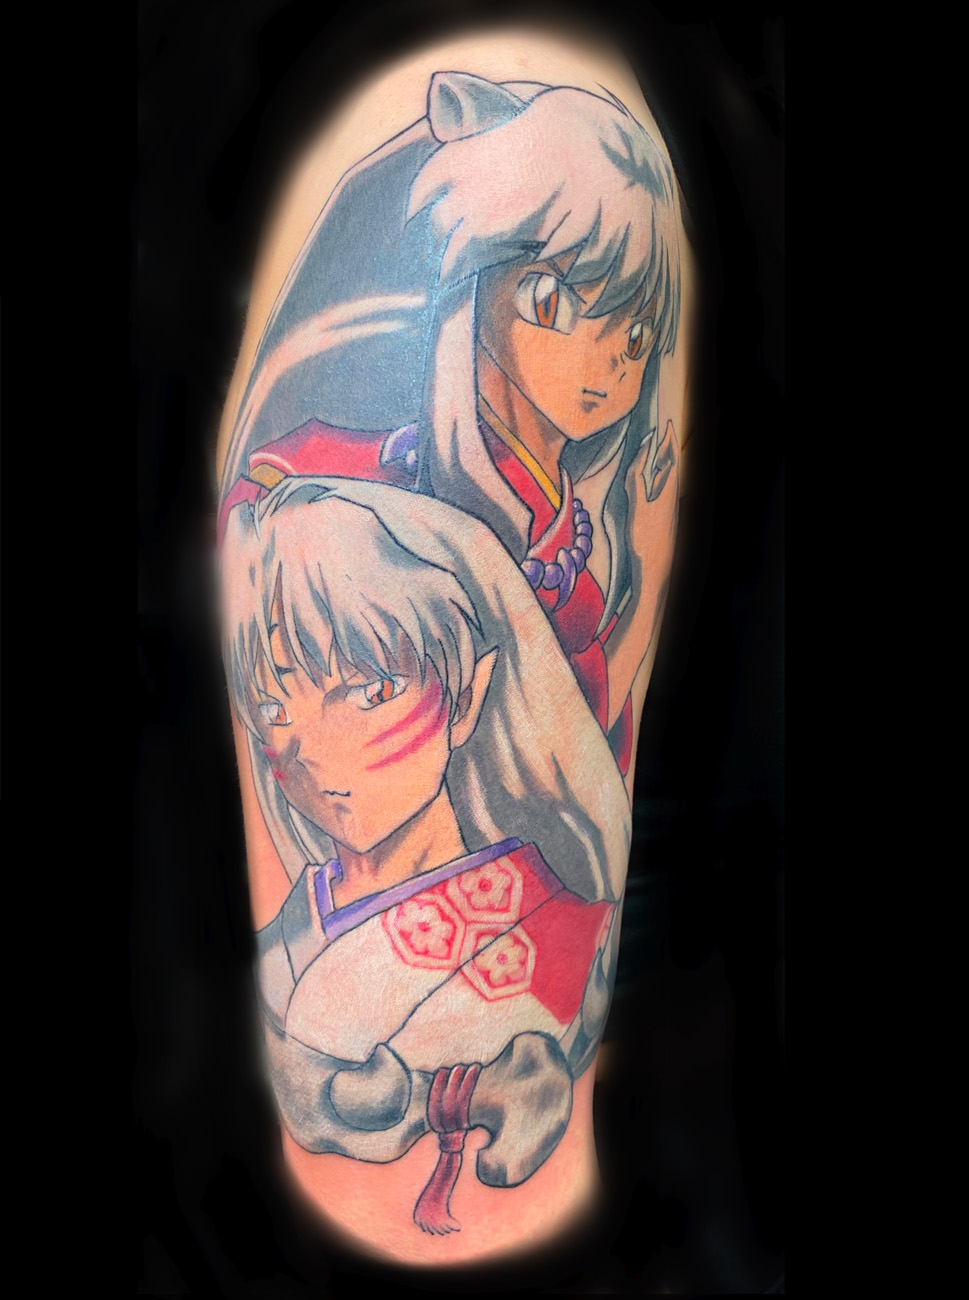 Inuyasha by Christopher Alcerro at Gold Dust Tattoos in lower  GreenvilleDallas  rtattoos